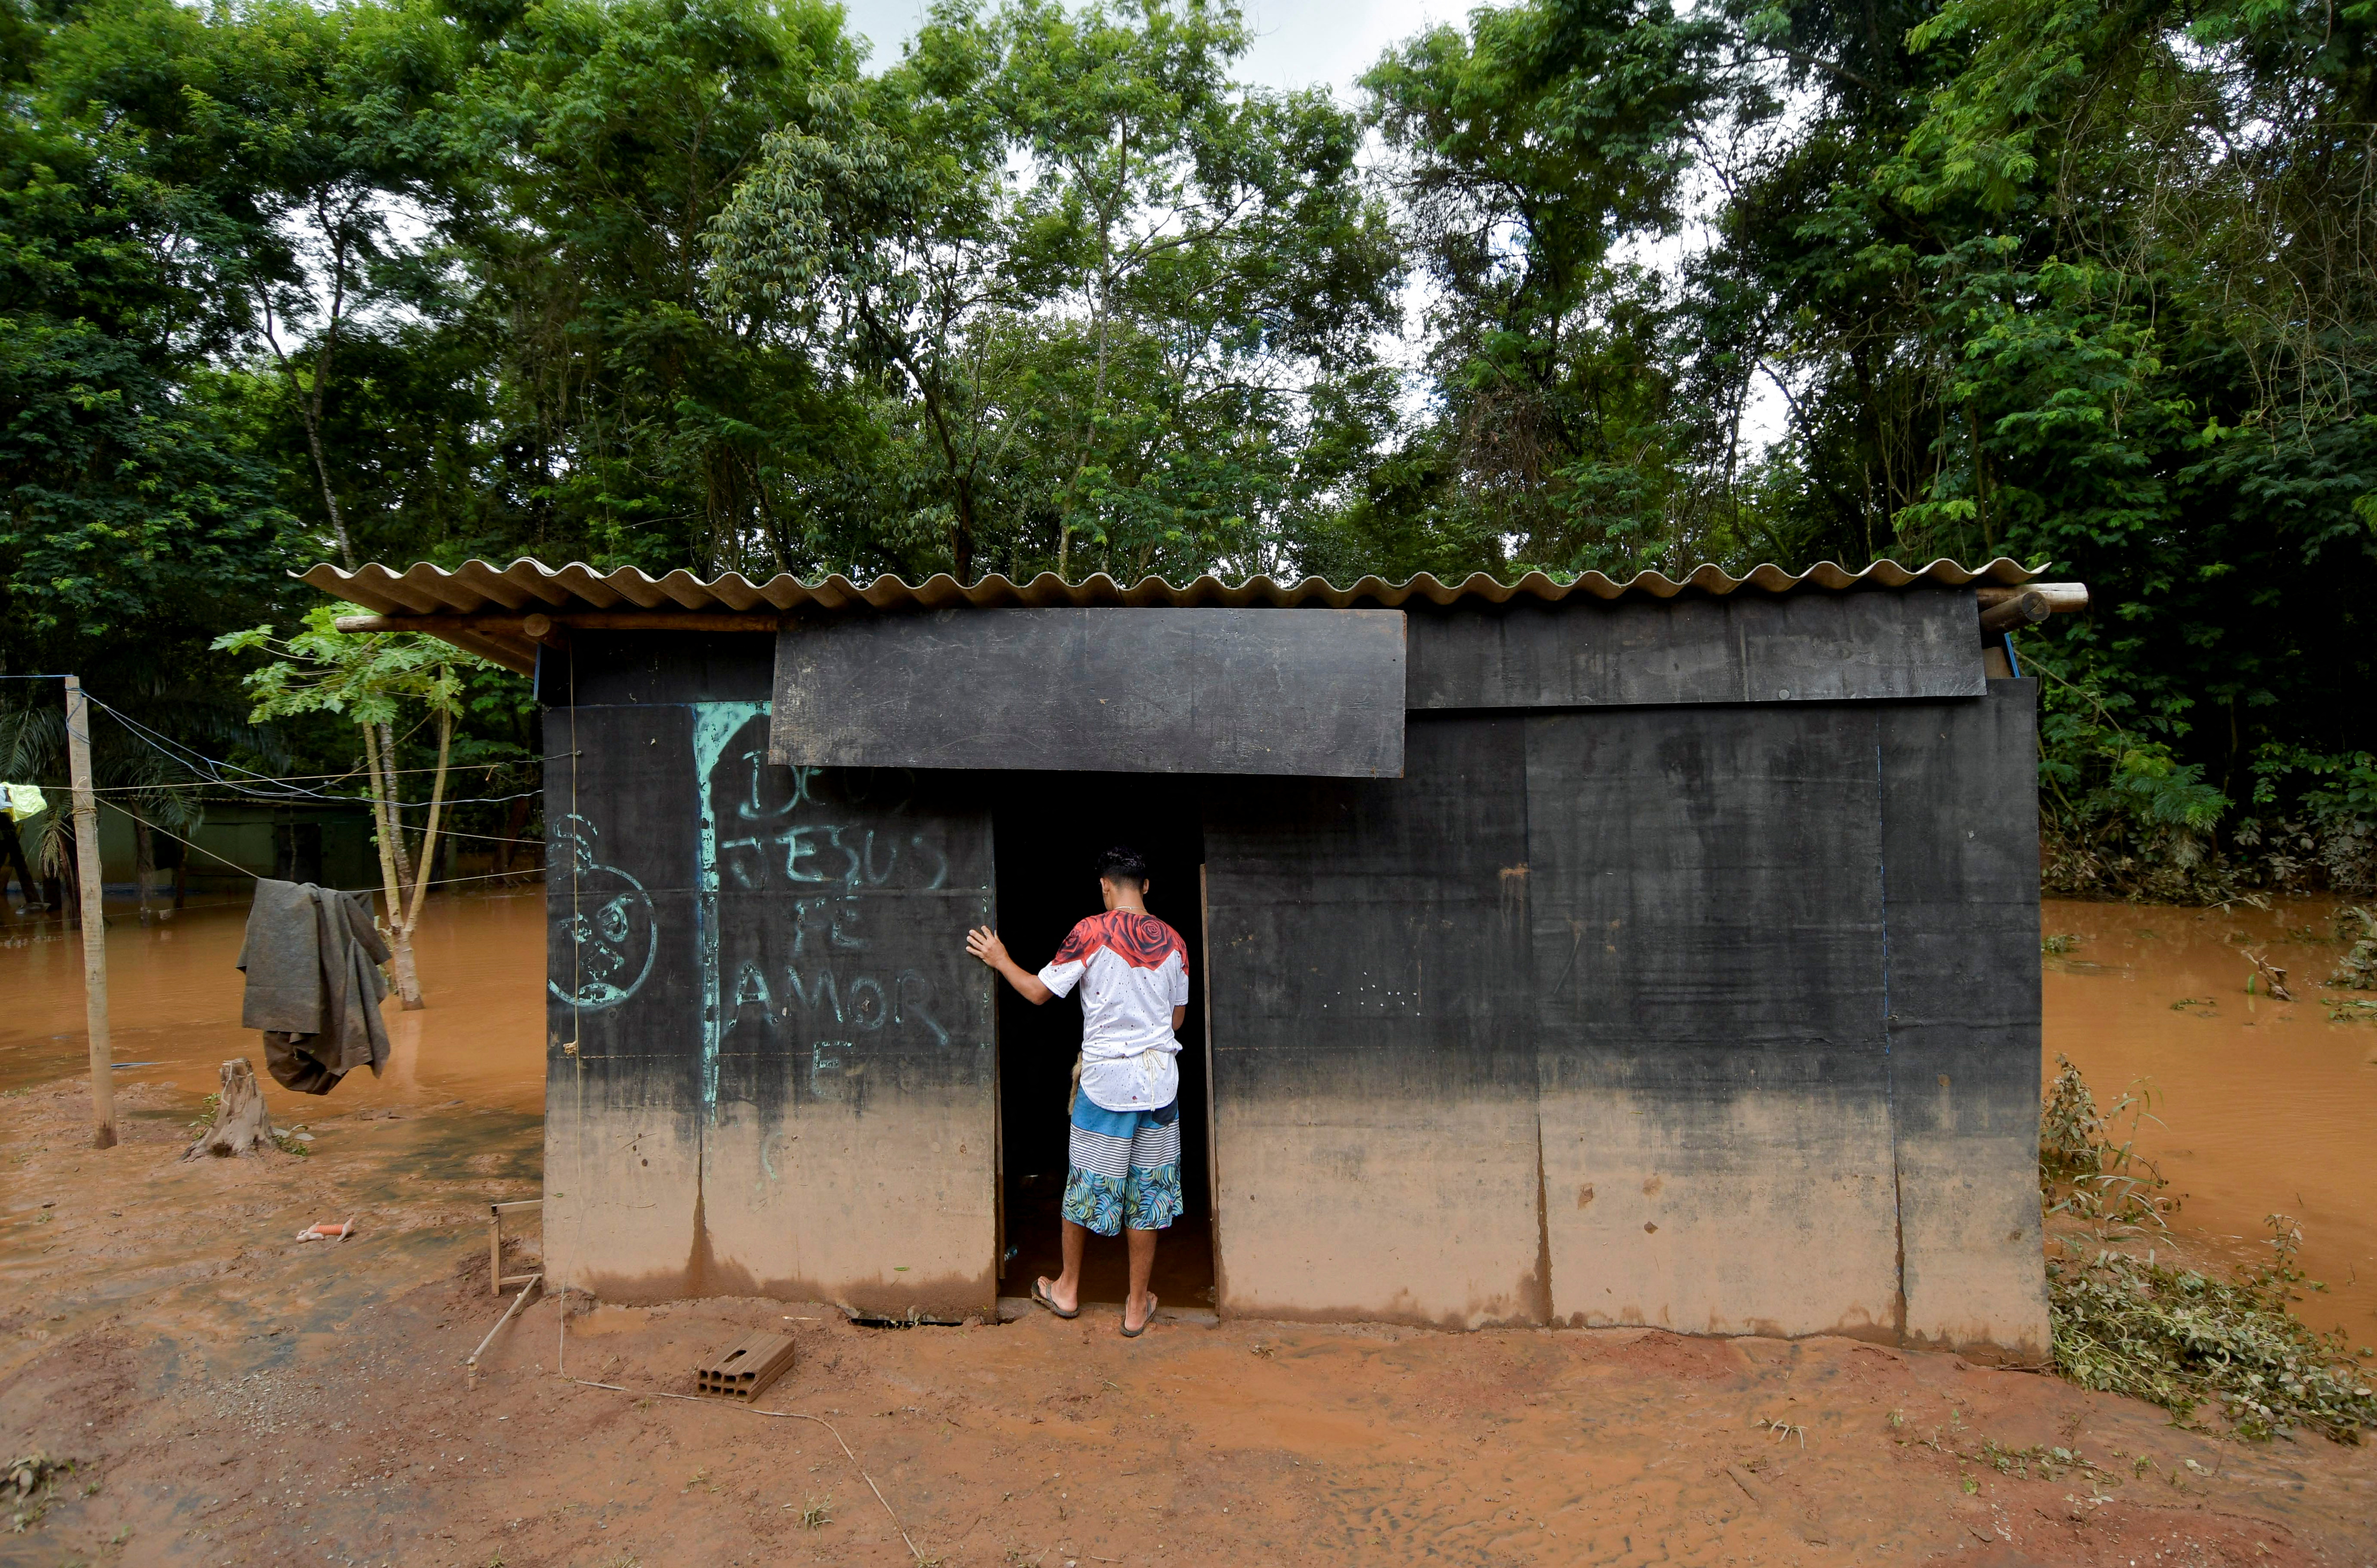 An indigenous man of the Pataxo ethnicity observe flooding in Nao Xoha village after pouring rains, in Sao Joaquim de Bicas, Minas Gerais state, Brazil January 12, 2022. REUTERS/Washington Alves